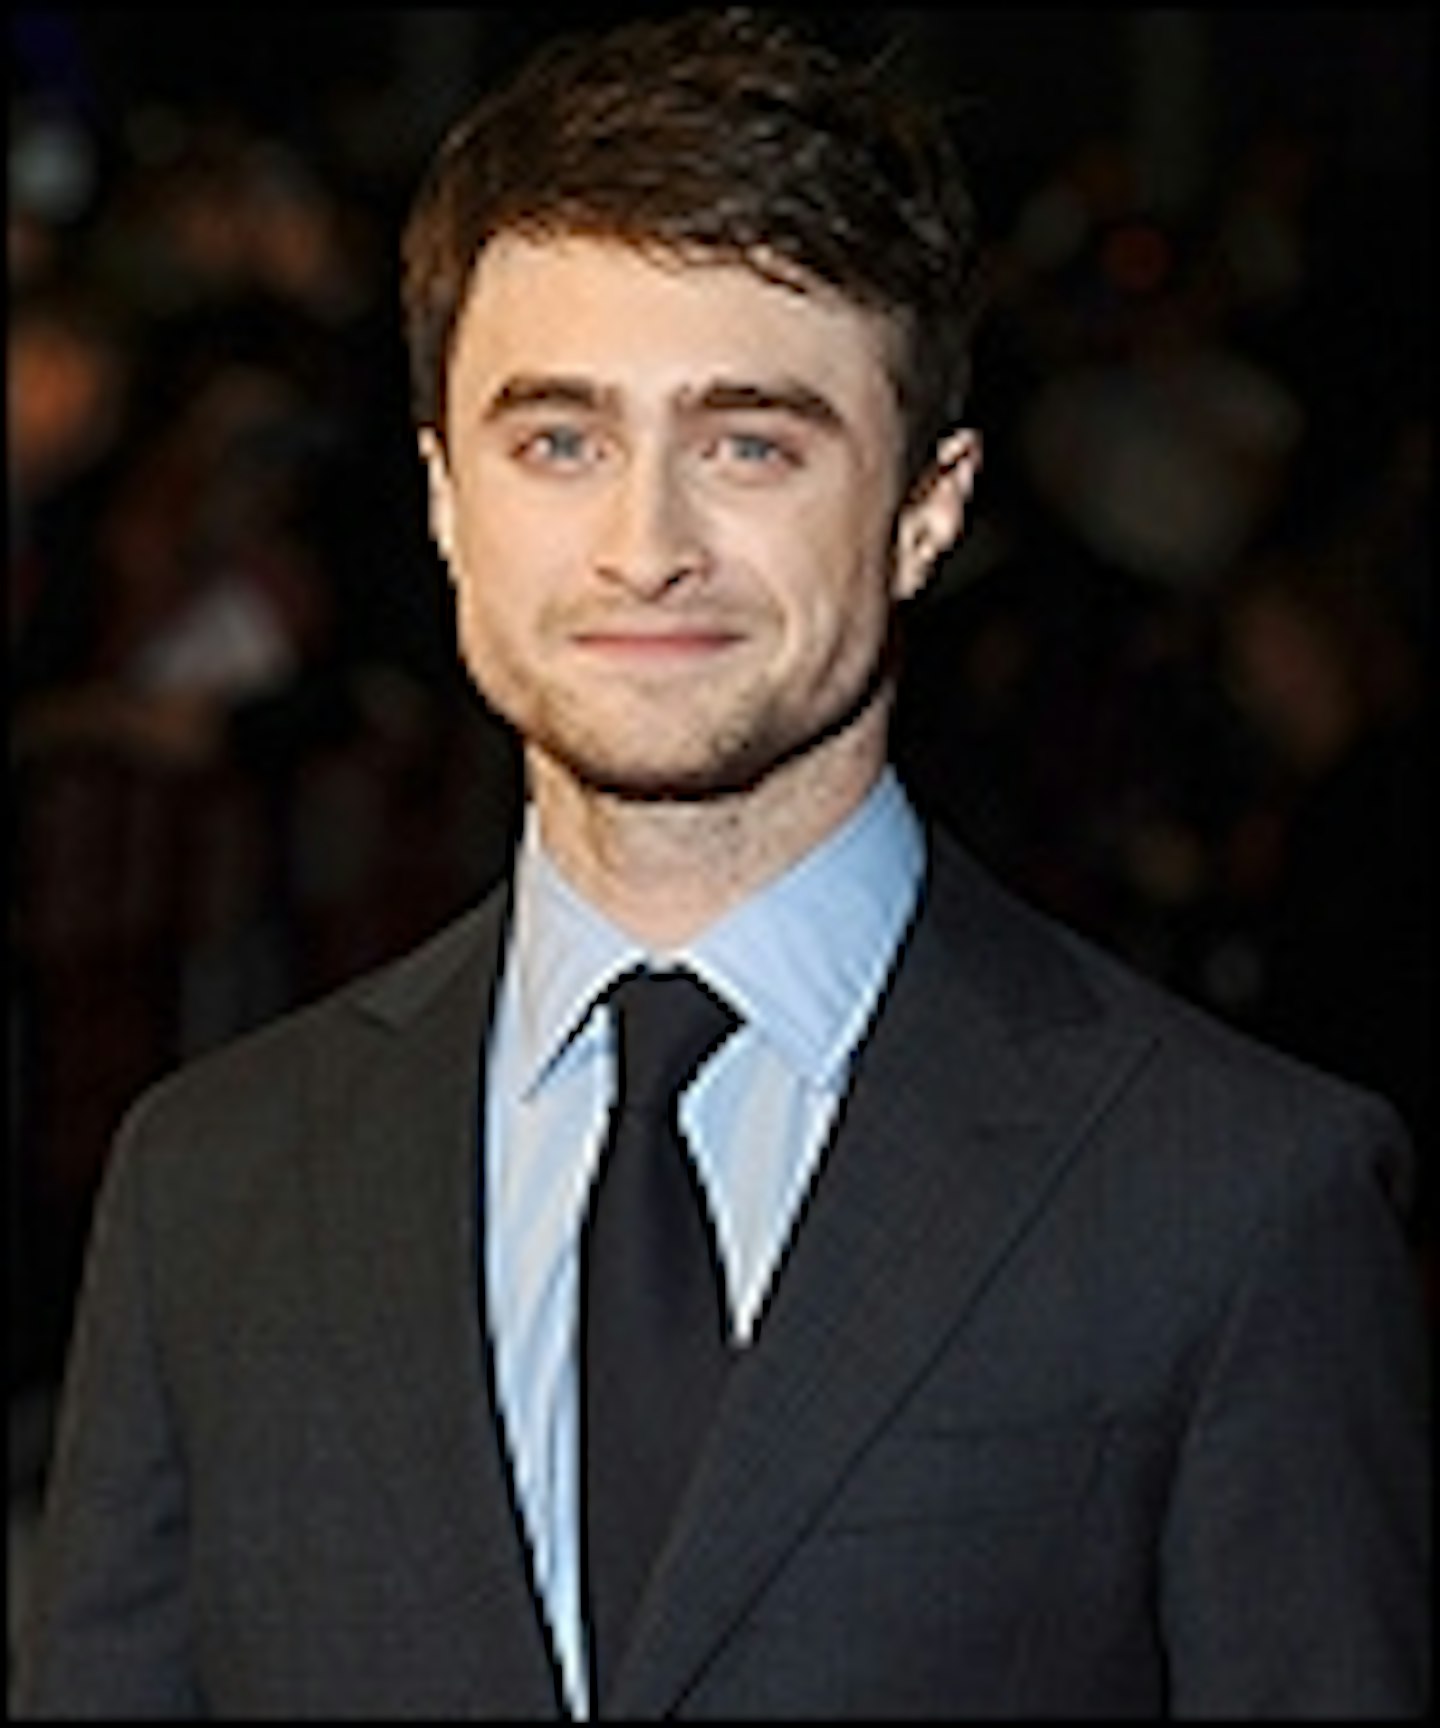 Daniel Radcliffe Has Gone For Gold